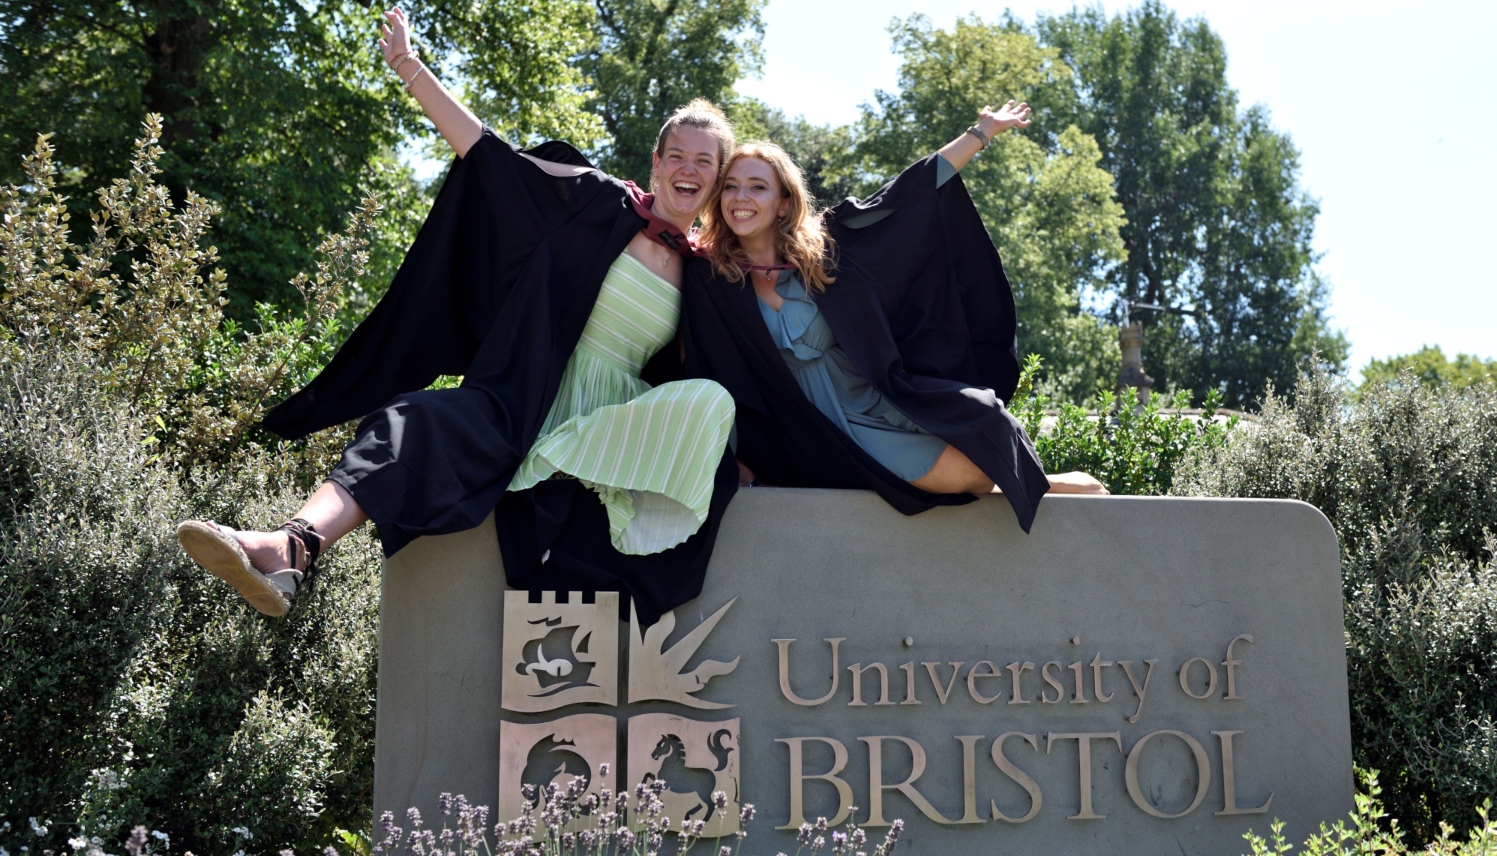 Two students in Degree gowns sitting on a University of Bristol sign.